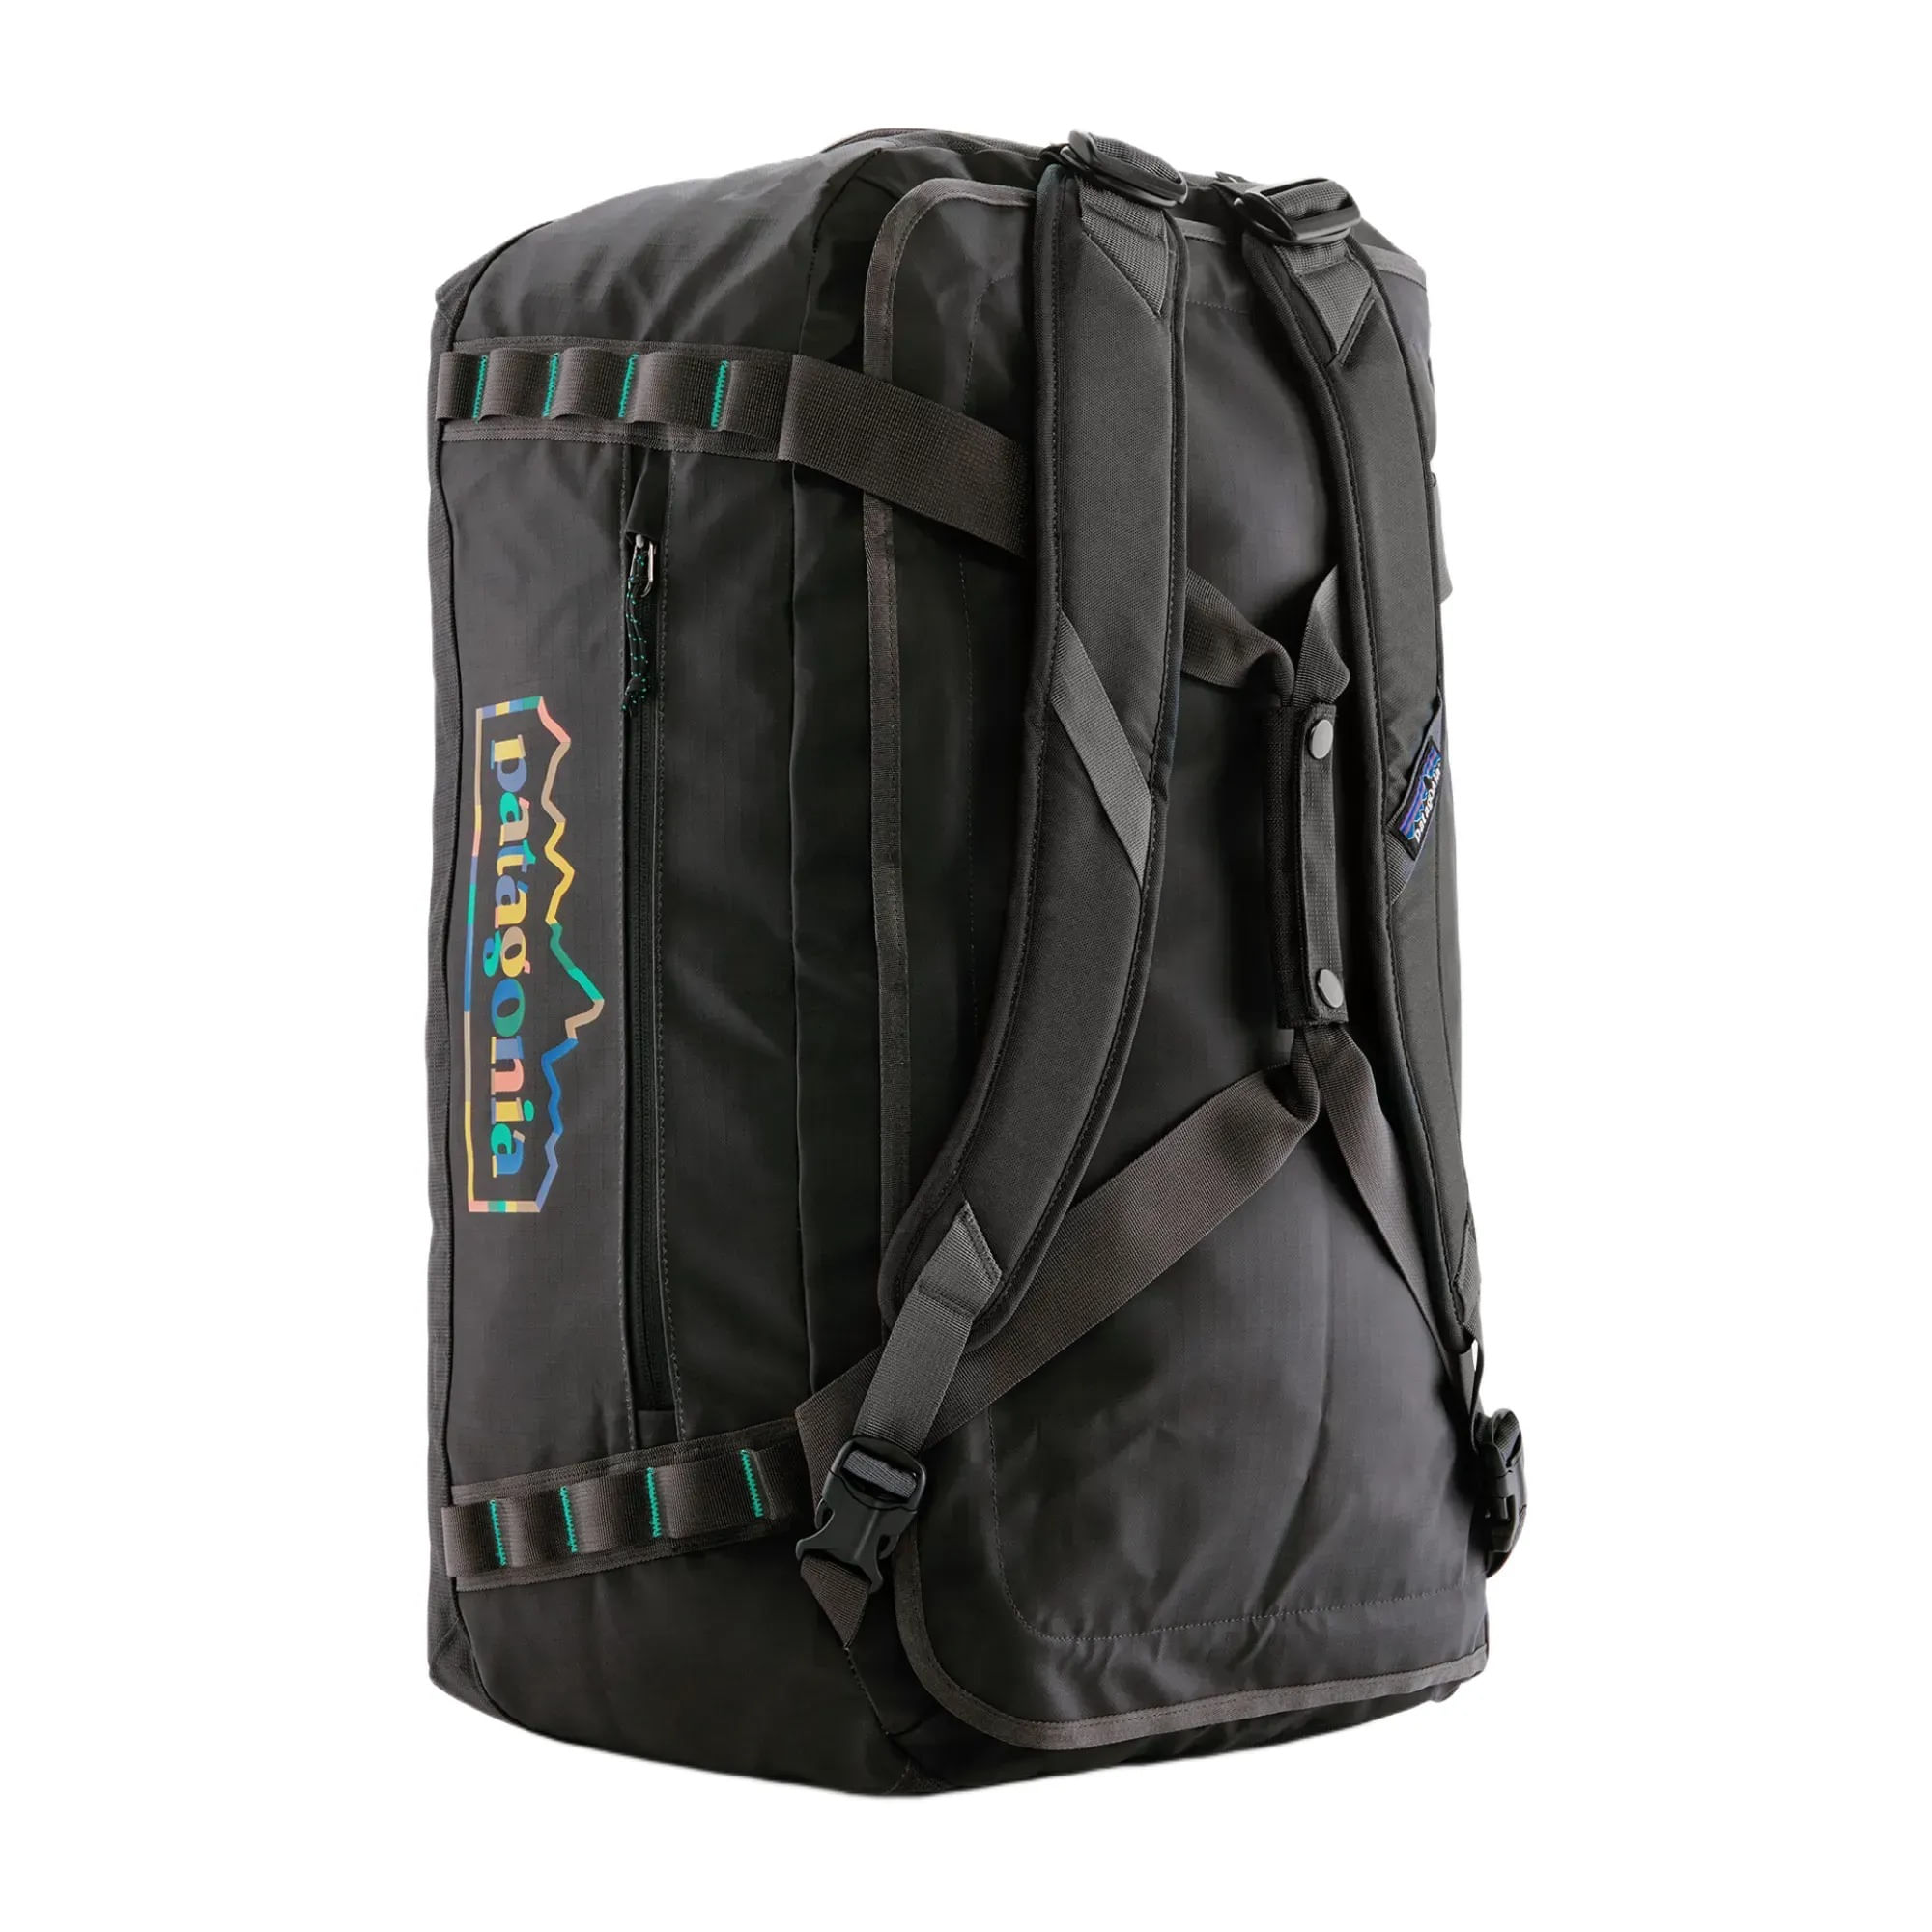 Patagonia Black Hole Duffel Bag - 55L - Al's Sporting Goods: Your One-Stop  Shop for Outdoor Sports Gear & Apparel